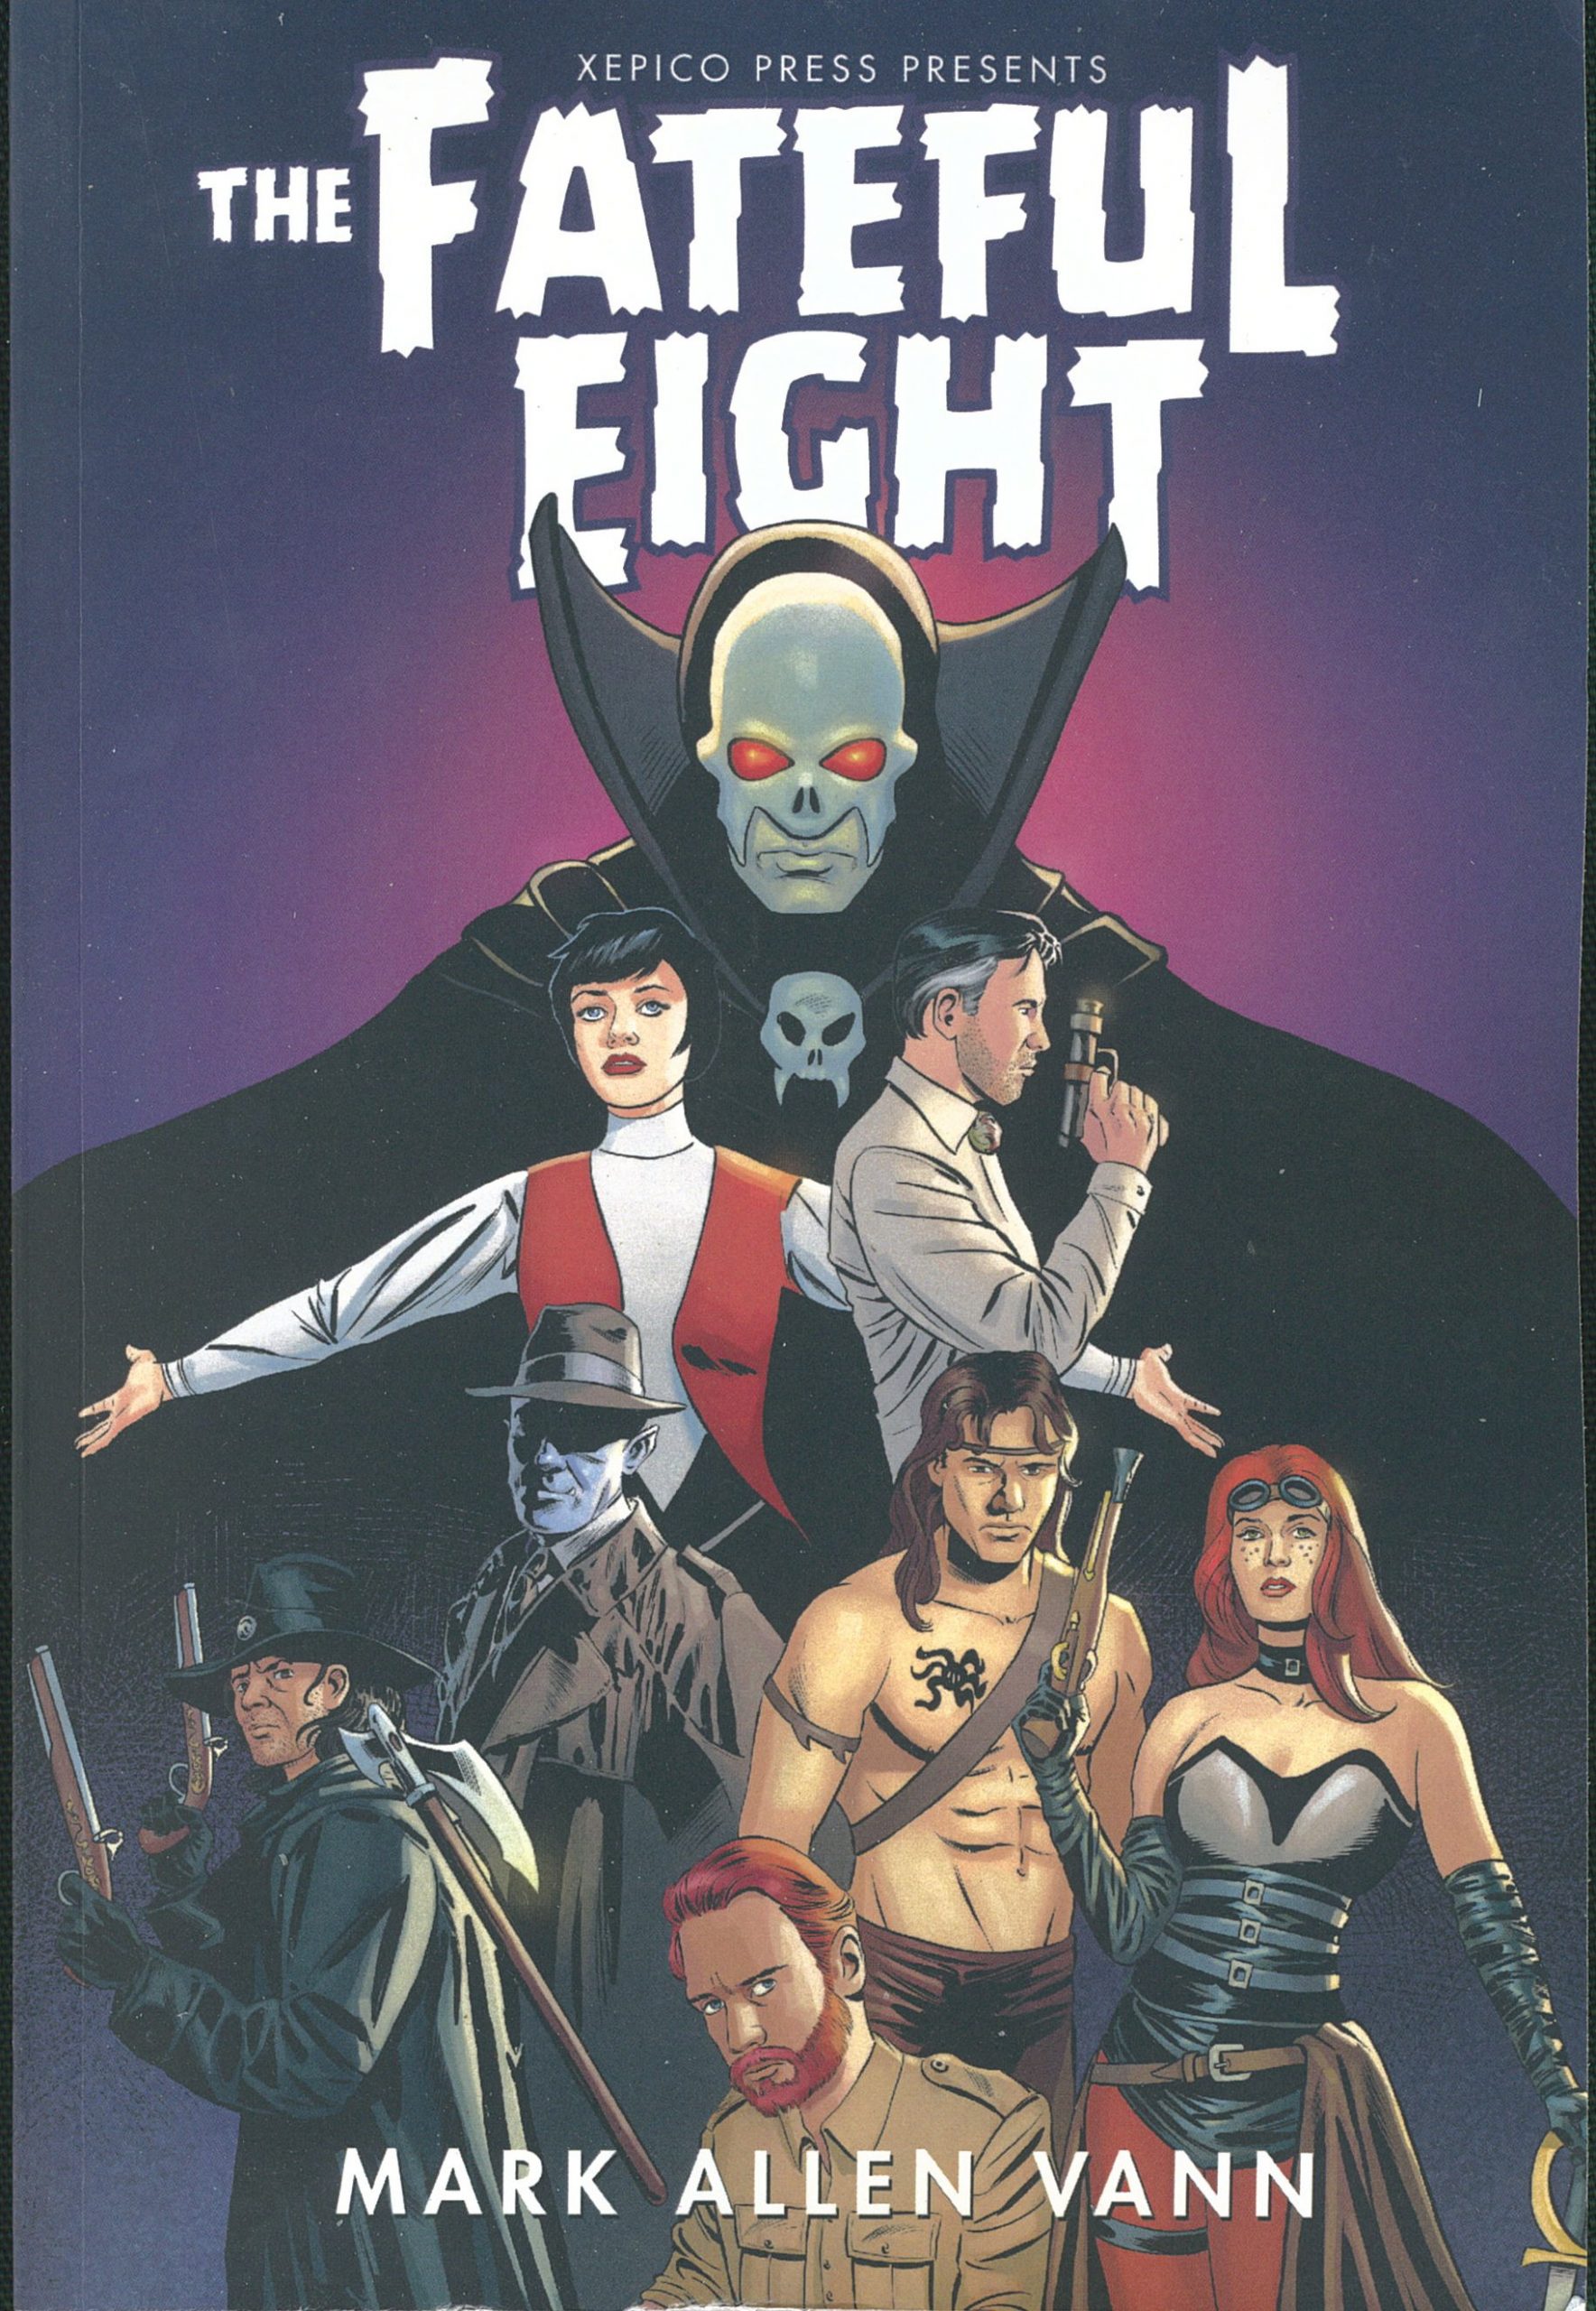 The Fateful Eight Book Review By Ron Fortier